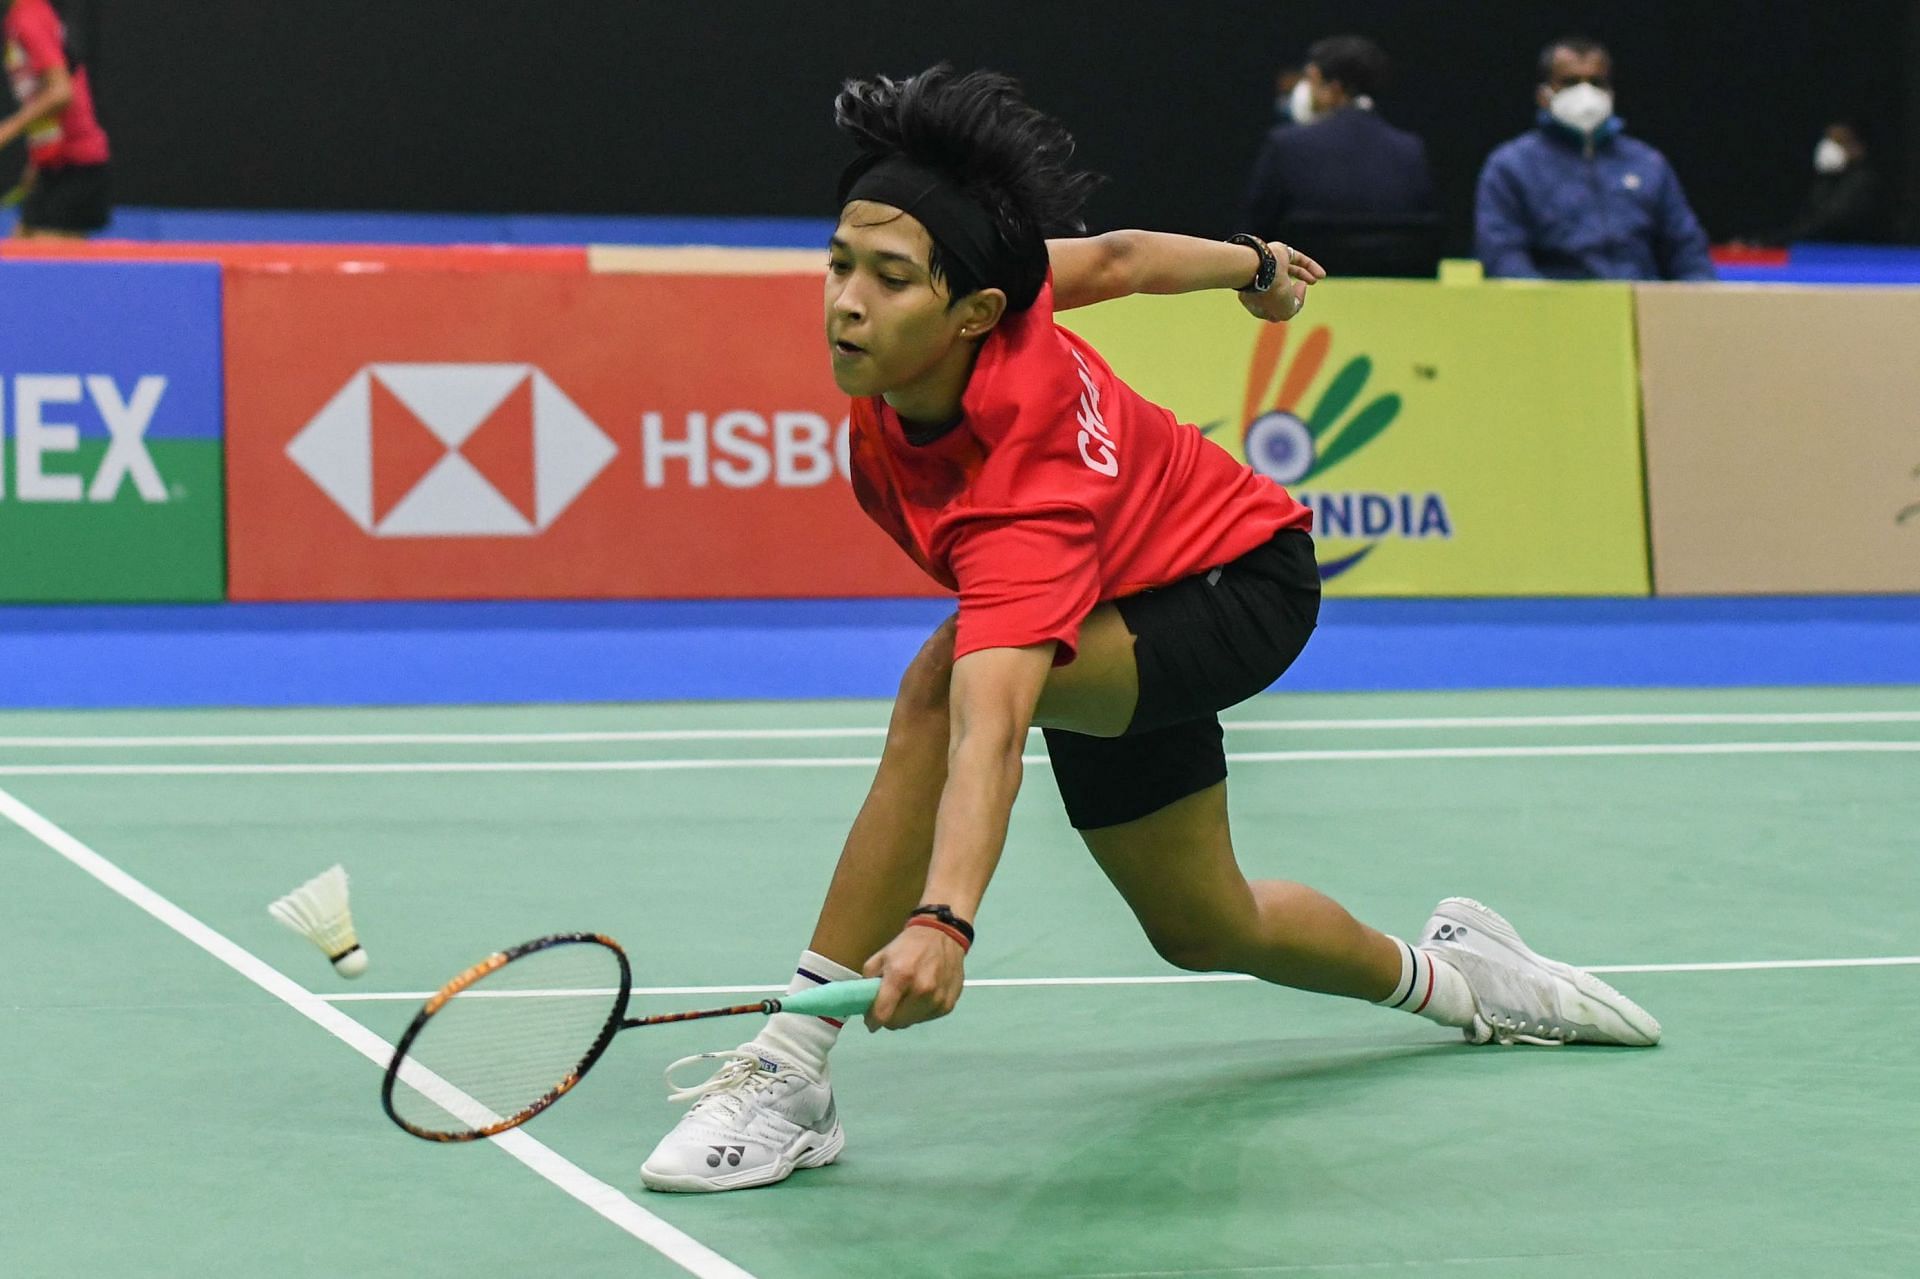 Ashmita Chaliha beat L&eacute;onice Huet of France 19-21, 21-10, 21-11 in the women&#039;s singles first round match of the Swiss Open in Basel on Wednesday (Pic credit: BAI)